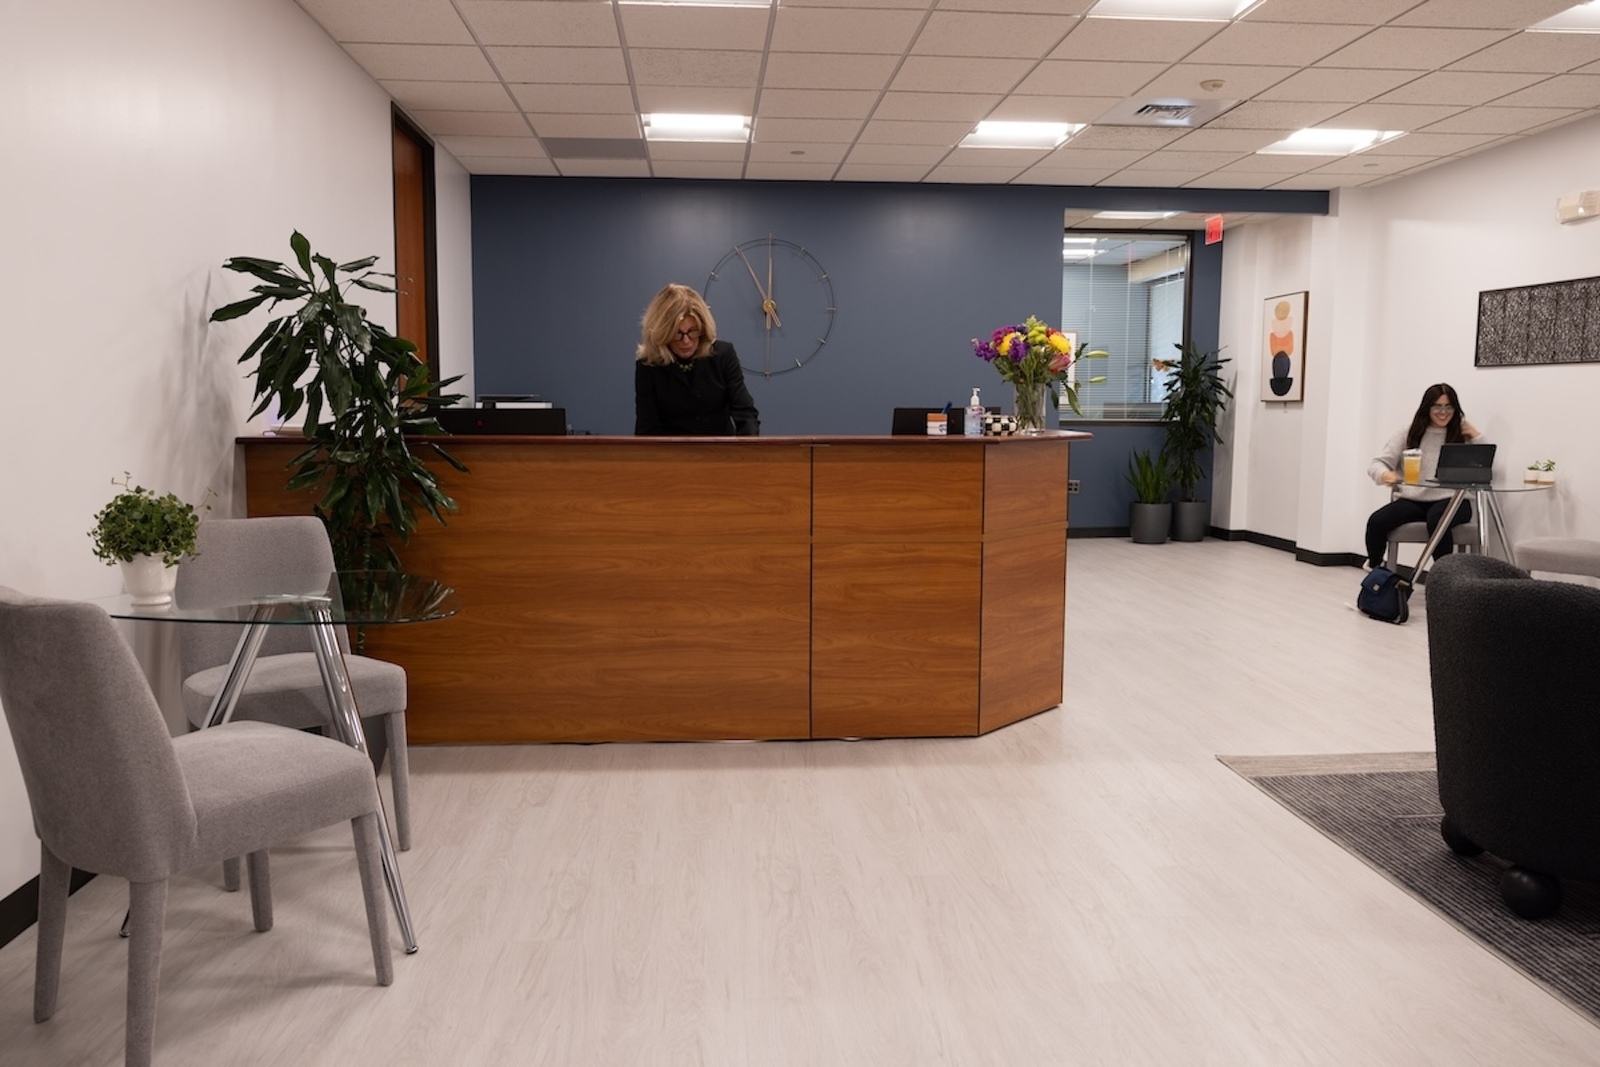 WorkCentral offers HOT Summer Deals for Private Office Space in Central Mass